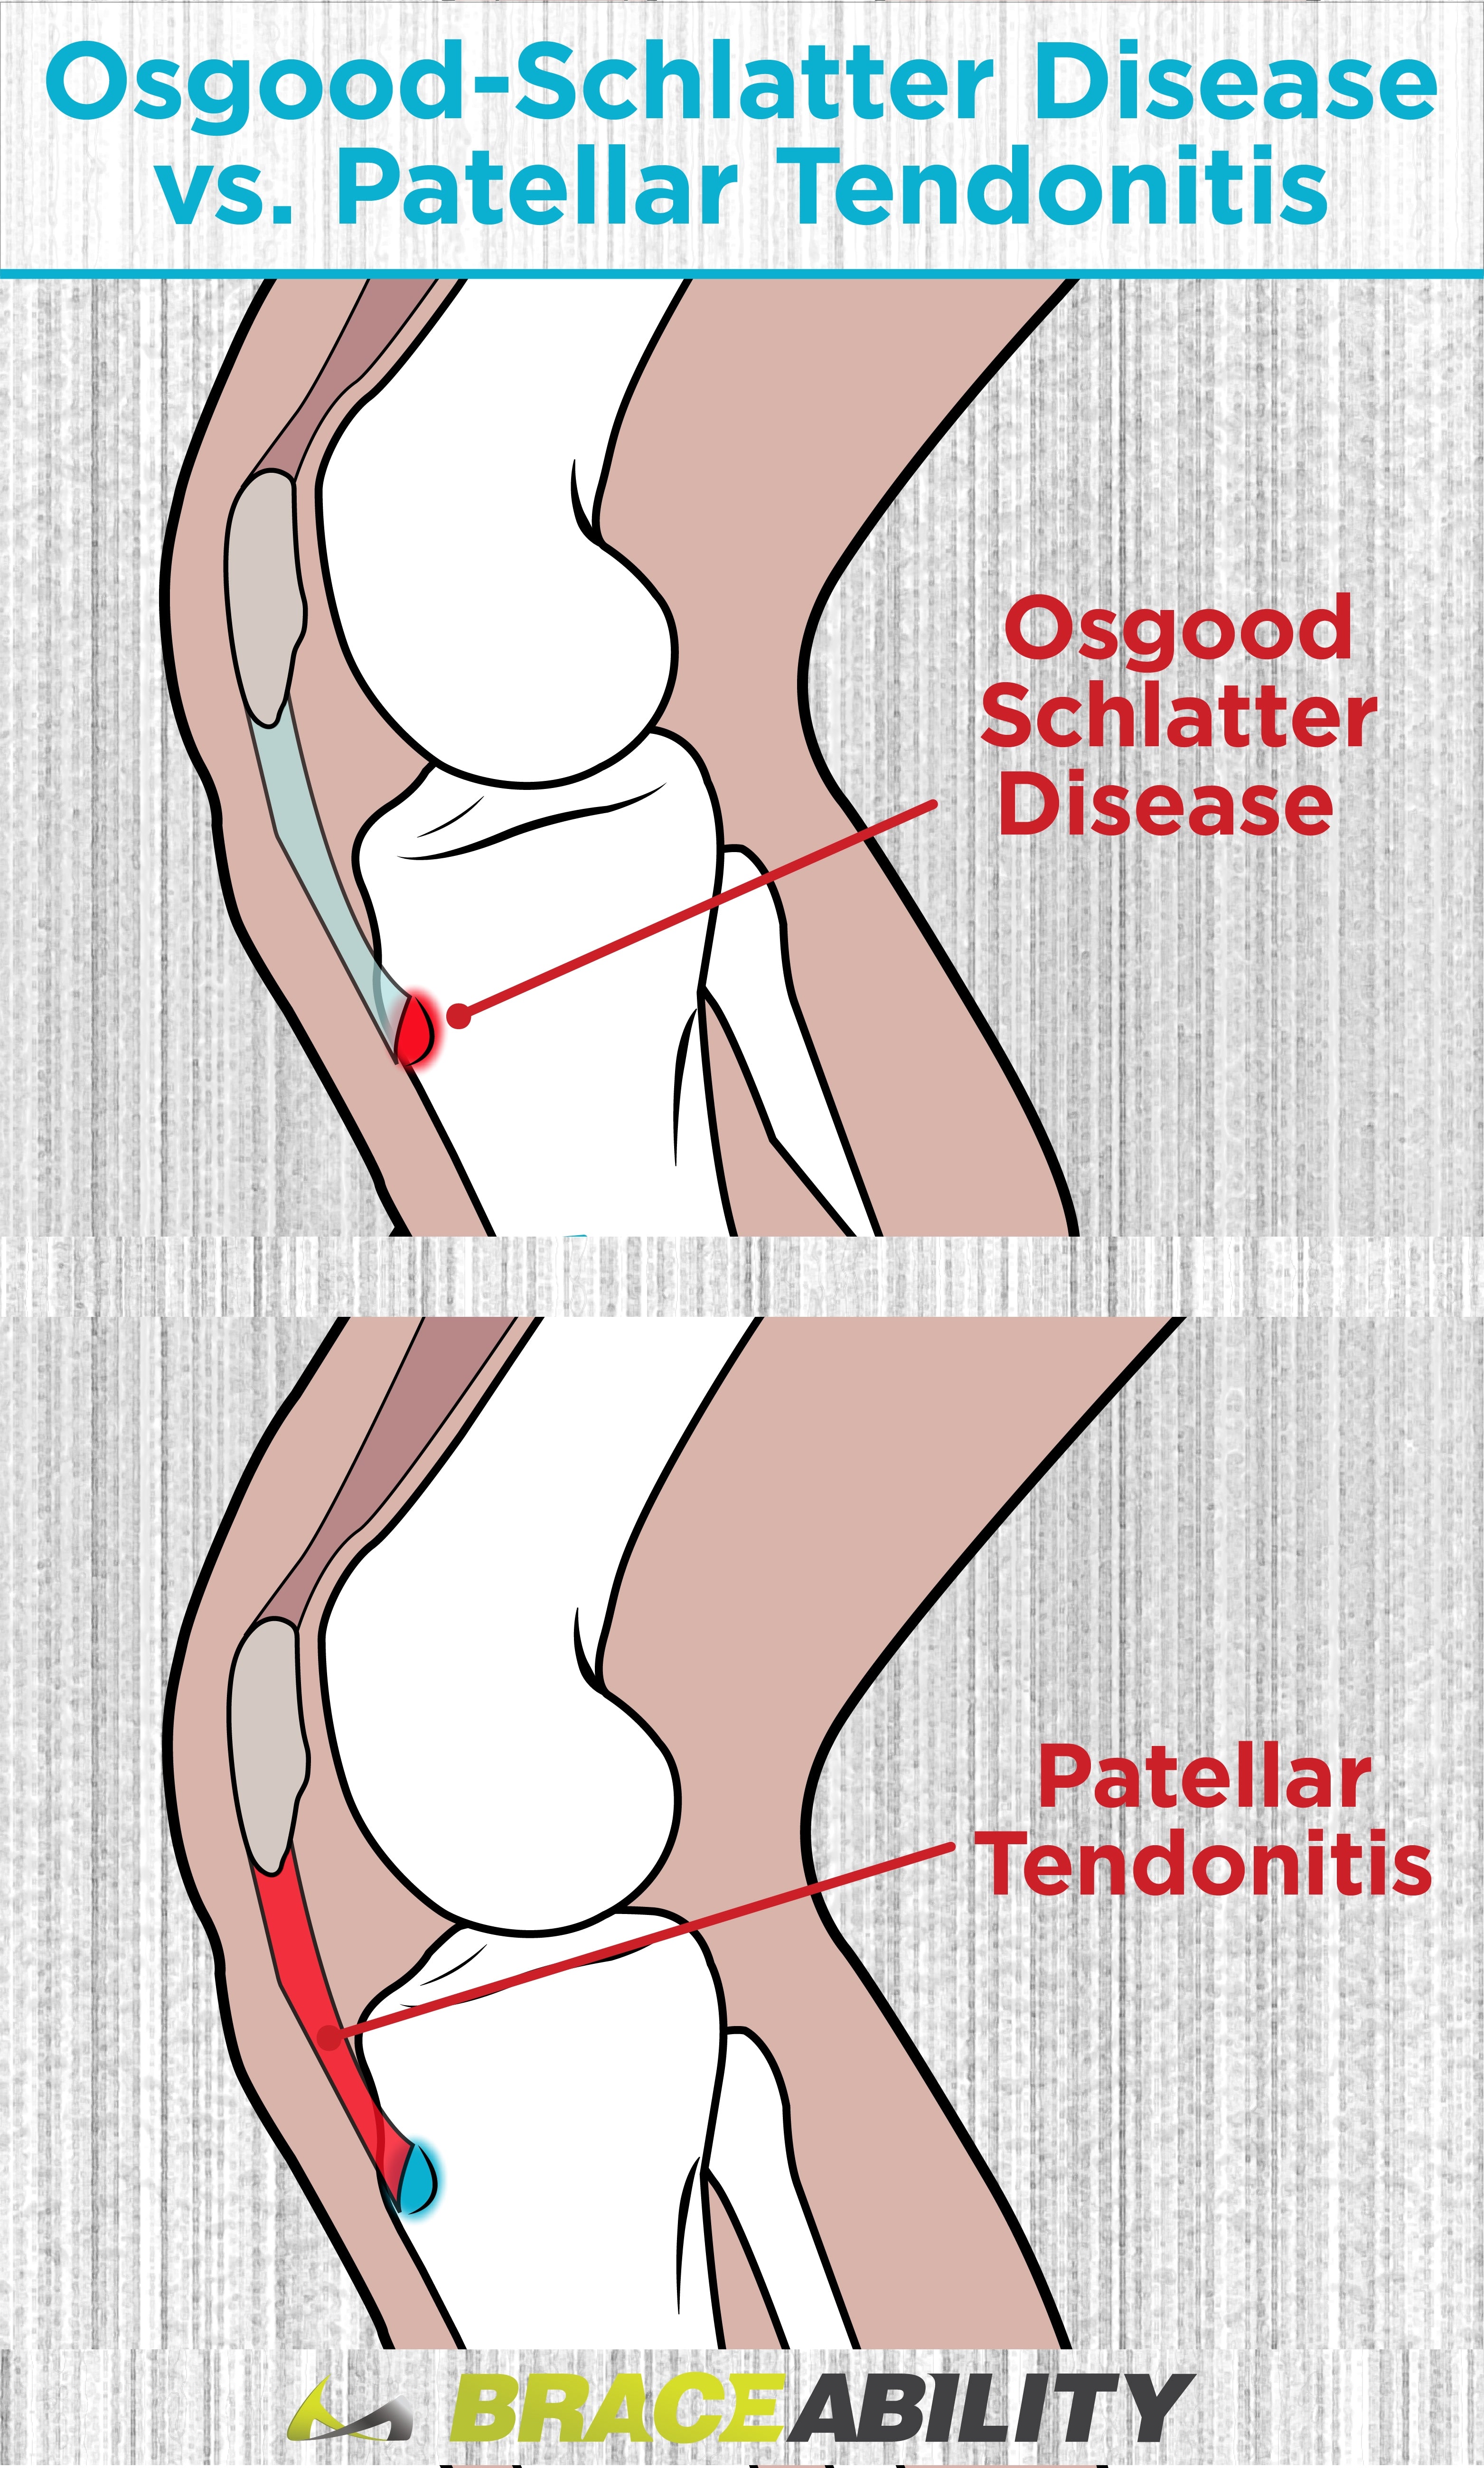 learn about the difference between osgood schlatter disease and patellar tendonitis